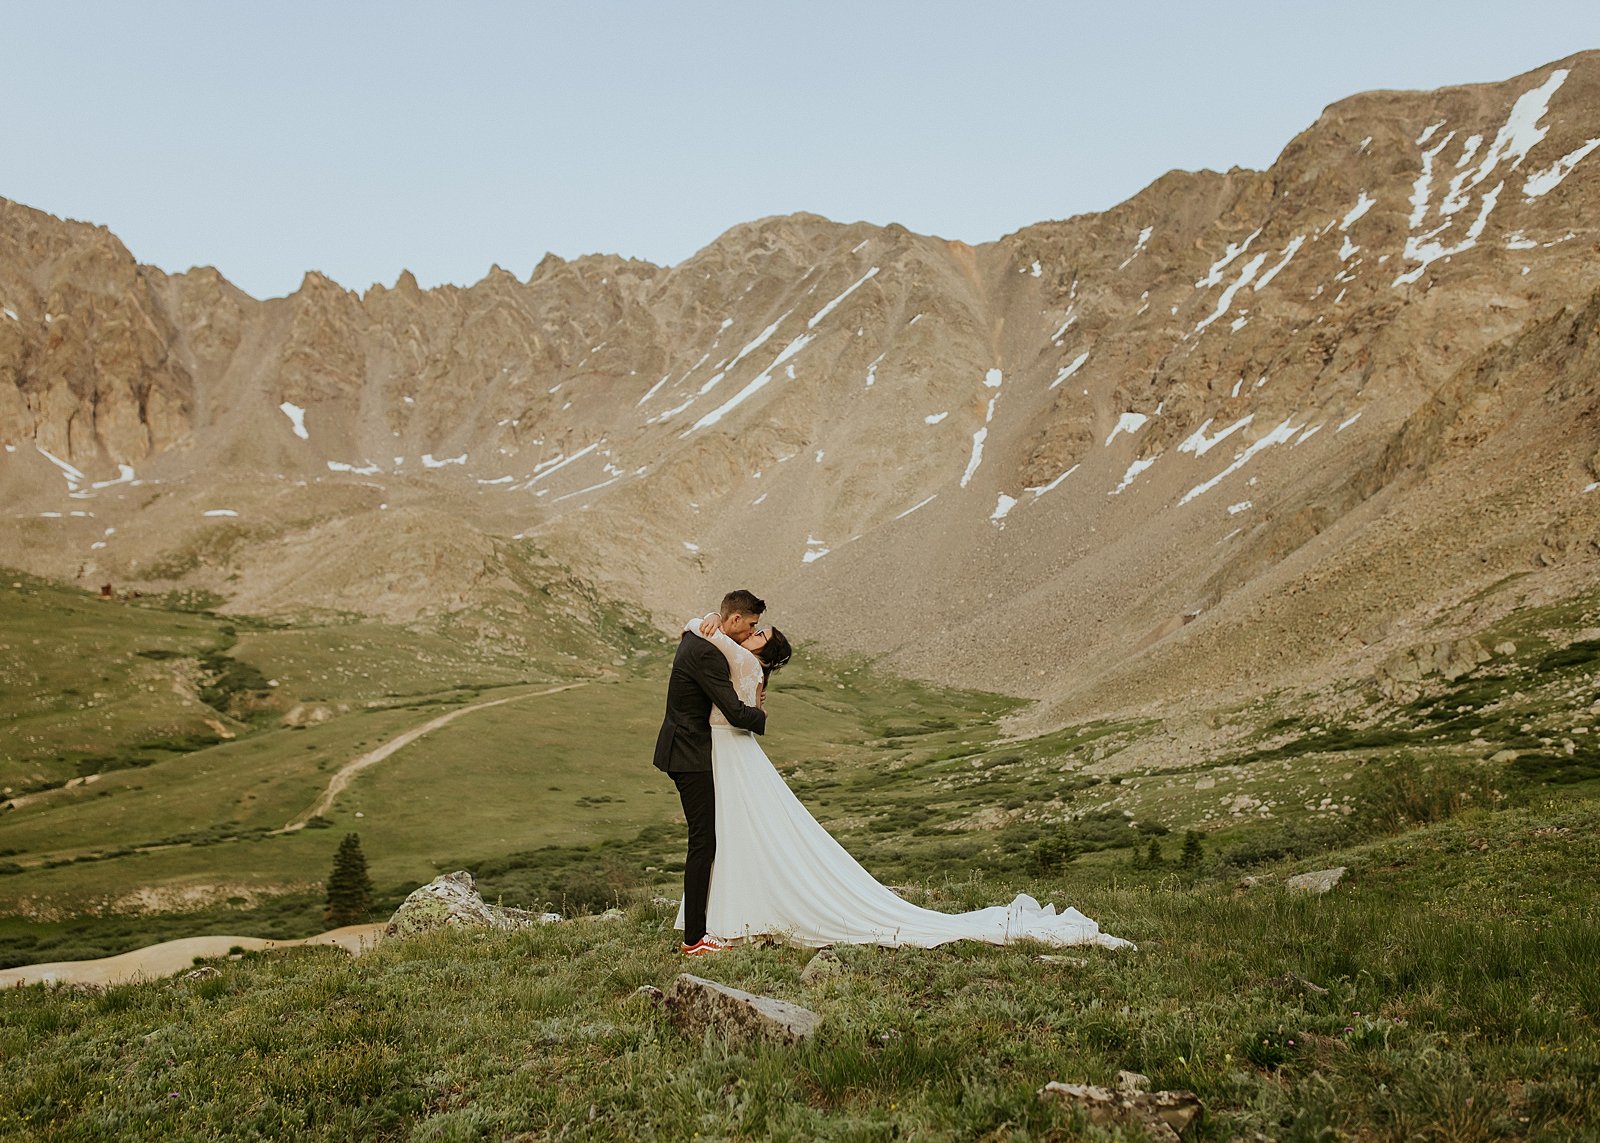 bride and groom in mountain scape, lake county colorado elopement, colorado adventure elopement, rocky mountain summer wildflowers, valley of wildflowers elopement, mountain meadow elopement